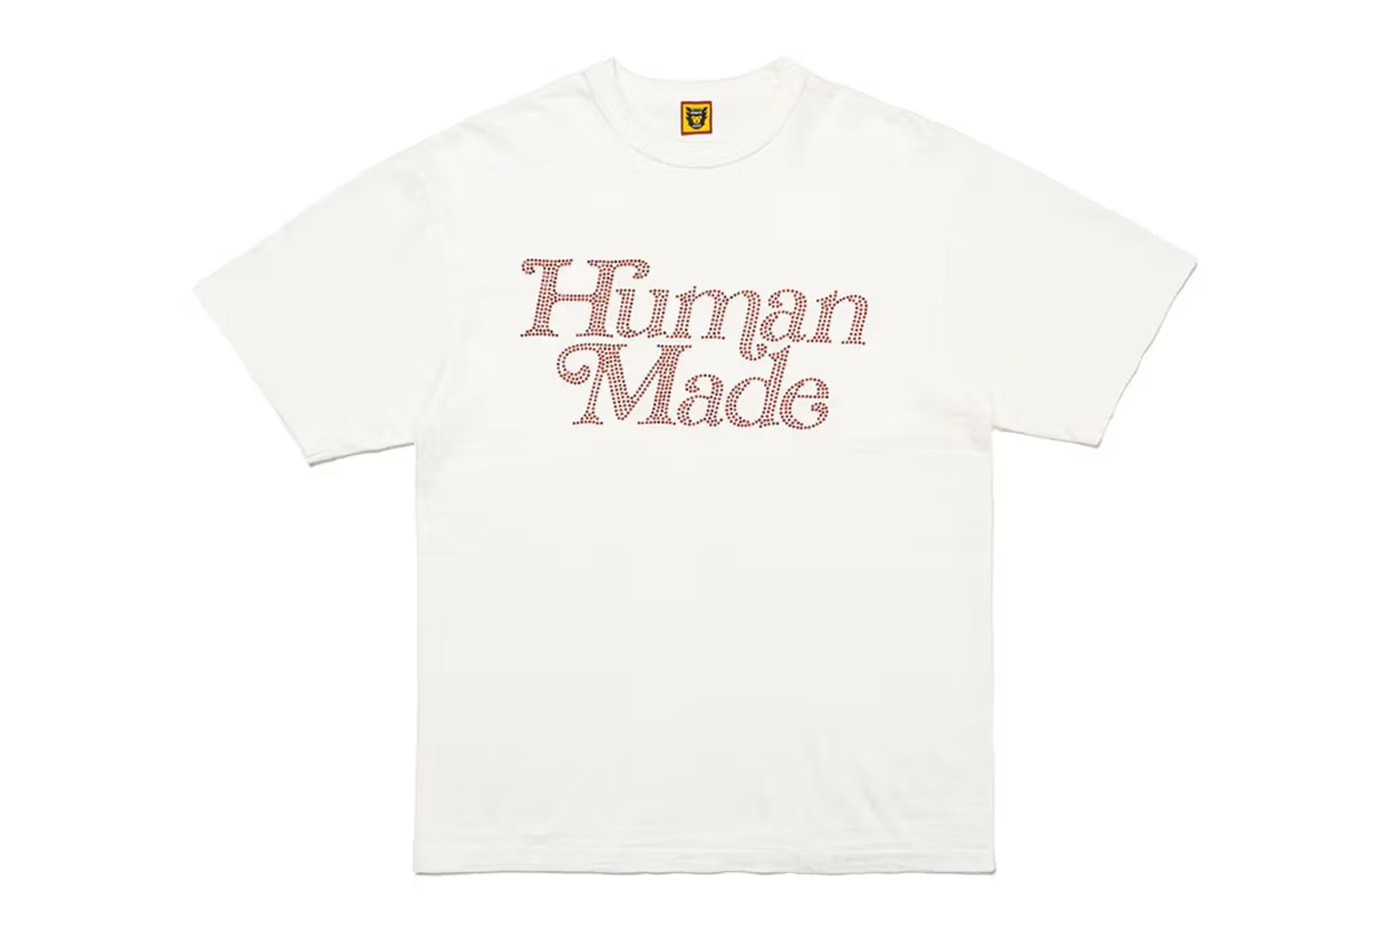 HUMAN MADE Prepares For Season 27 With 30-Page Lookbook verdy tee crystal jewel release link drop futuristic teen pharrell duck price 26 collab graphic